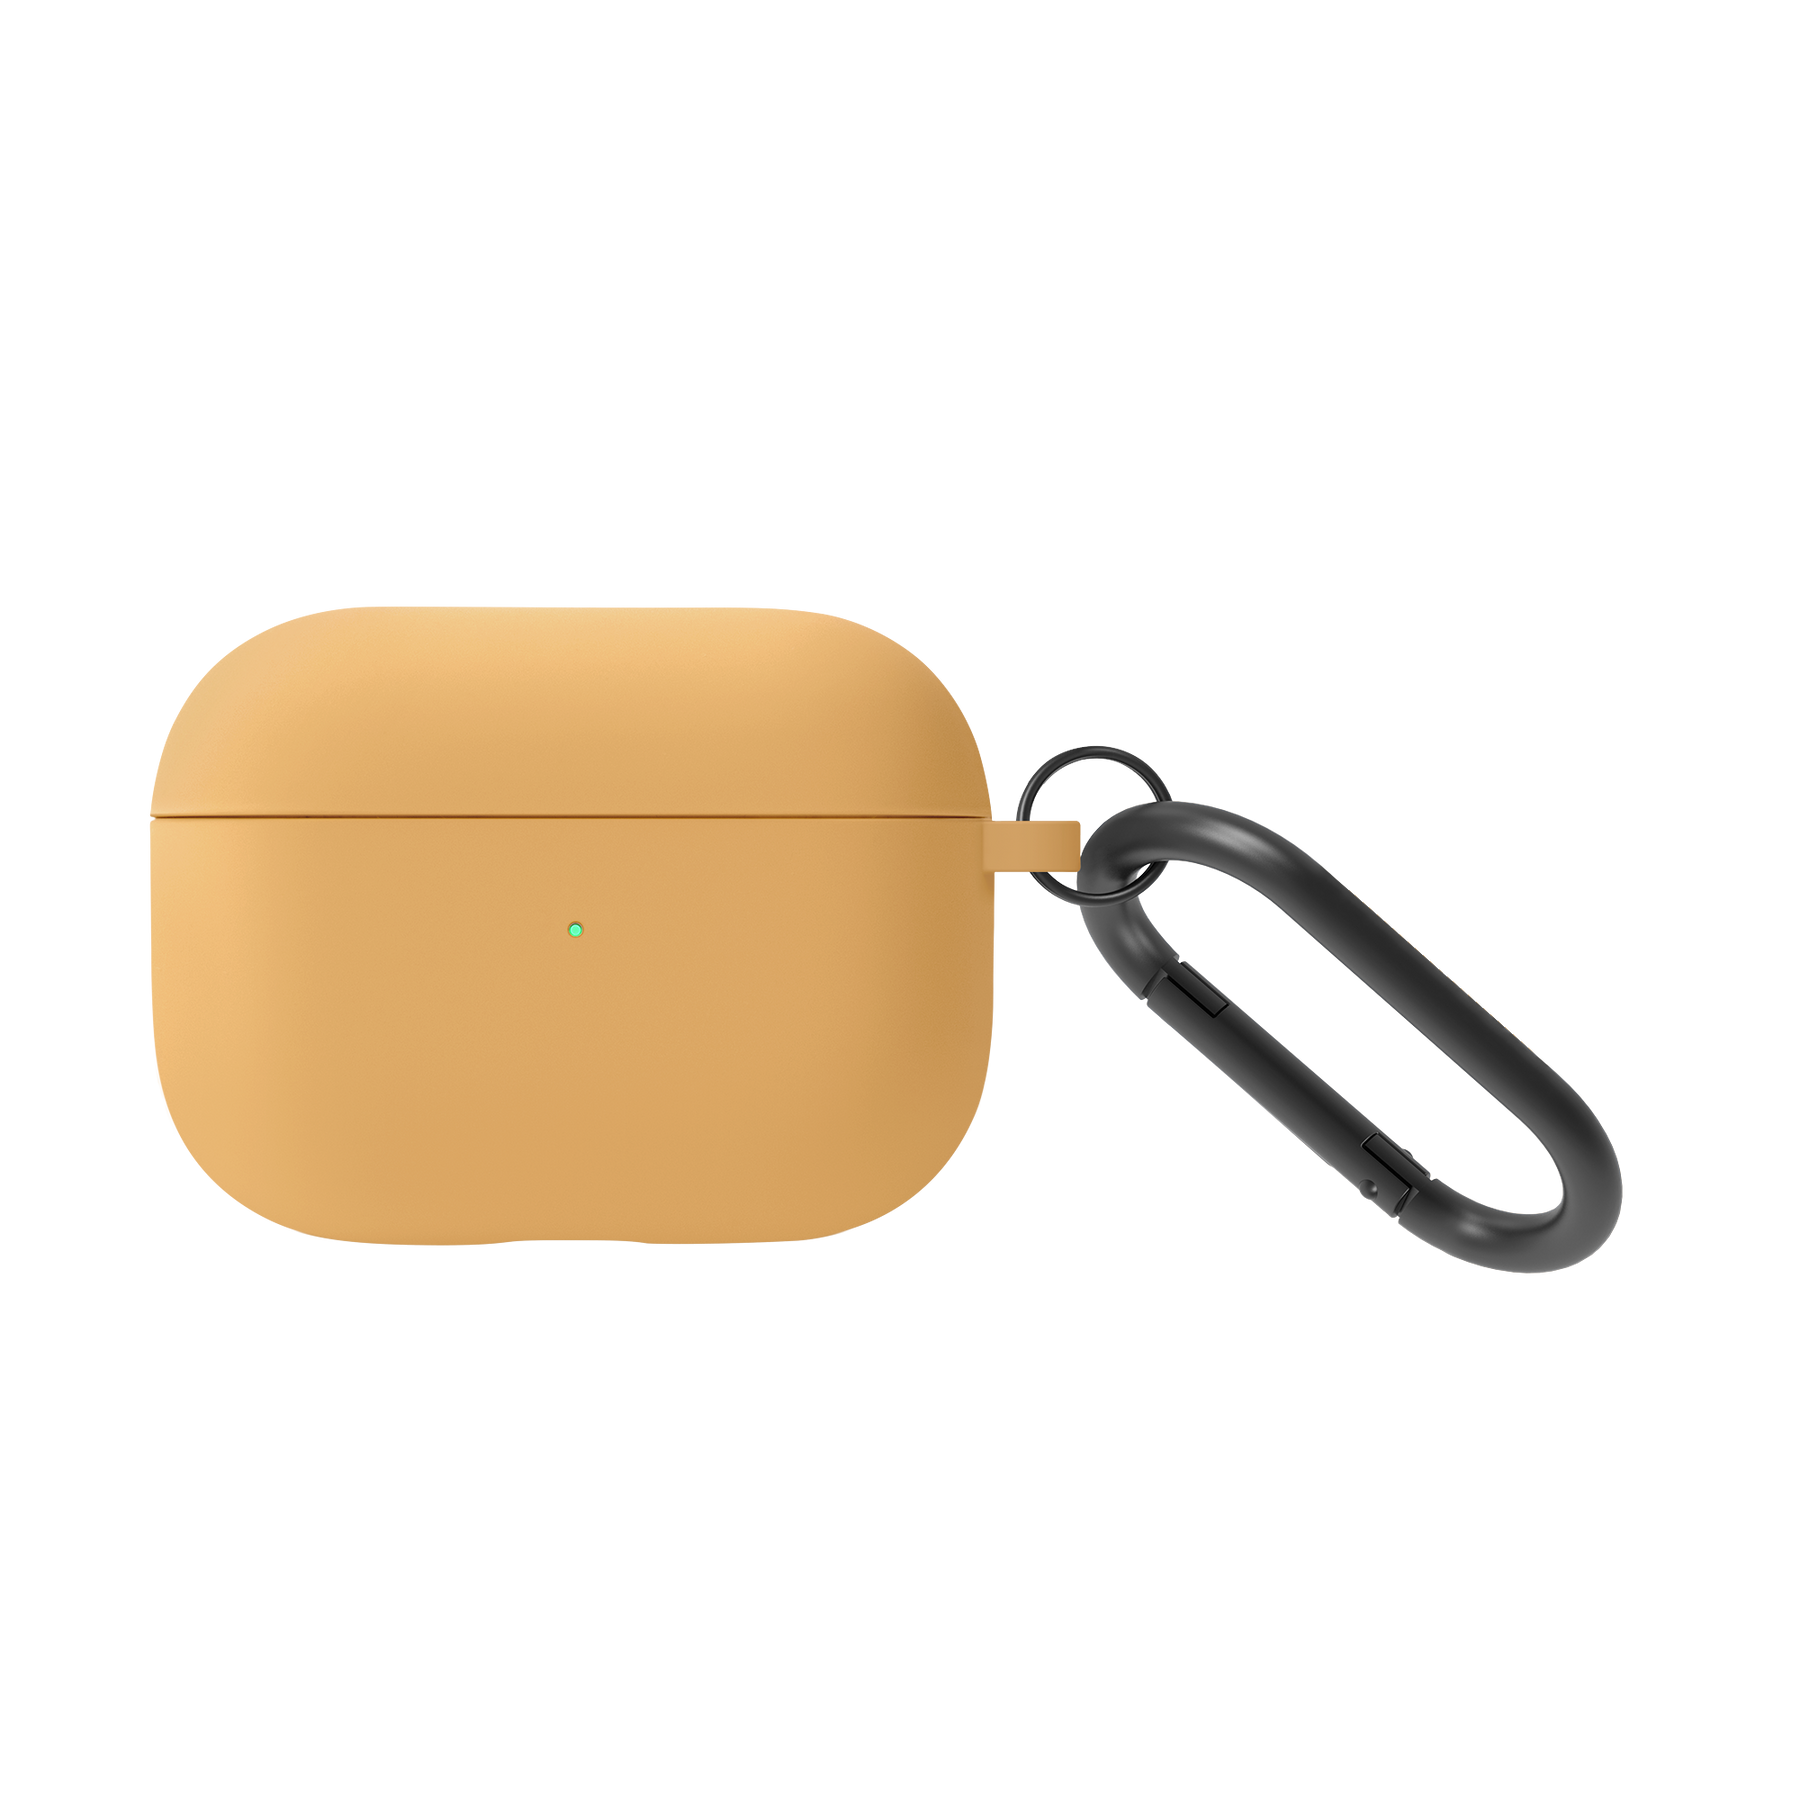 AirPods Pro Case, Apple Airpods Cover